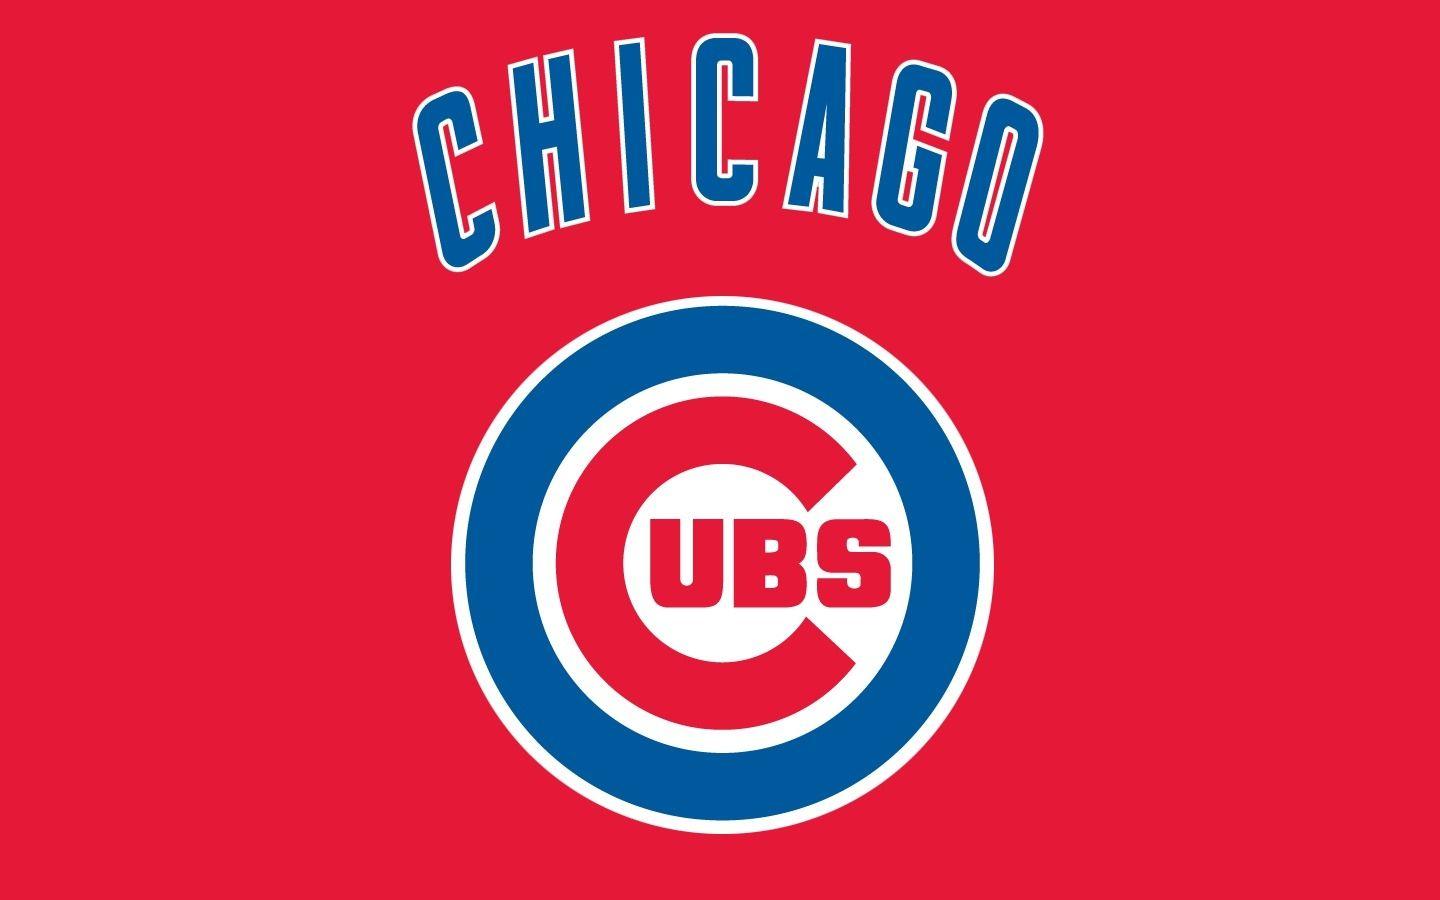 Chicago Cubs logos on Red, Desktop and mobile wallpaper